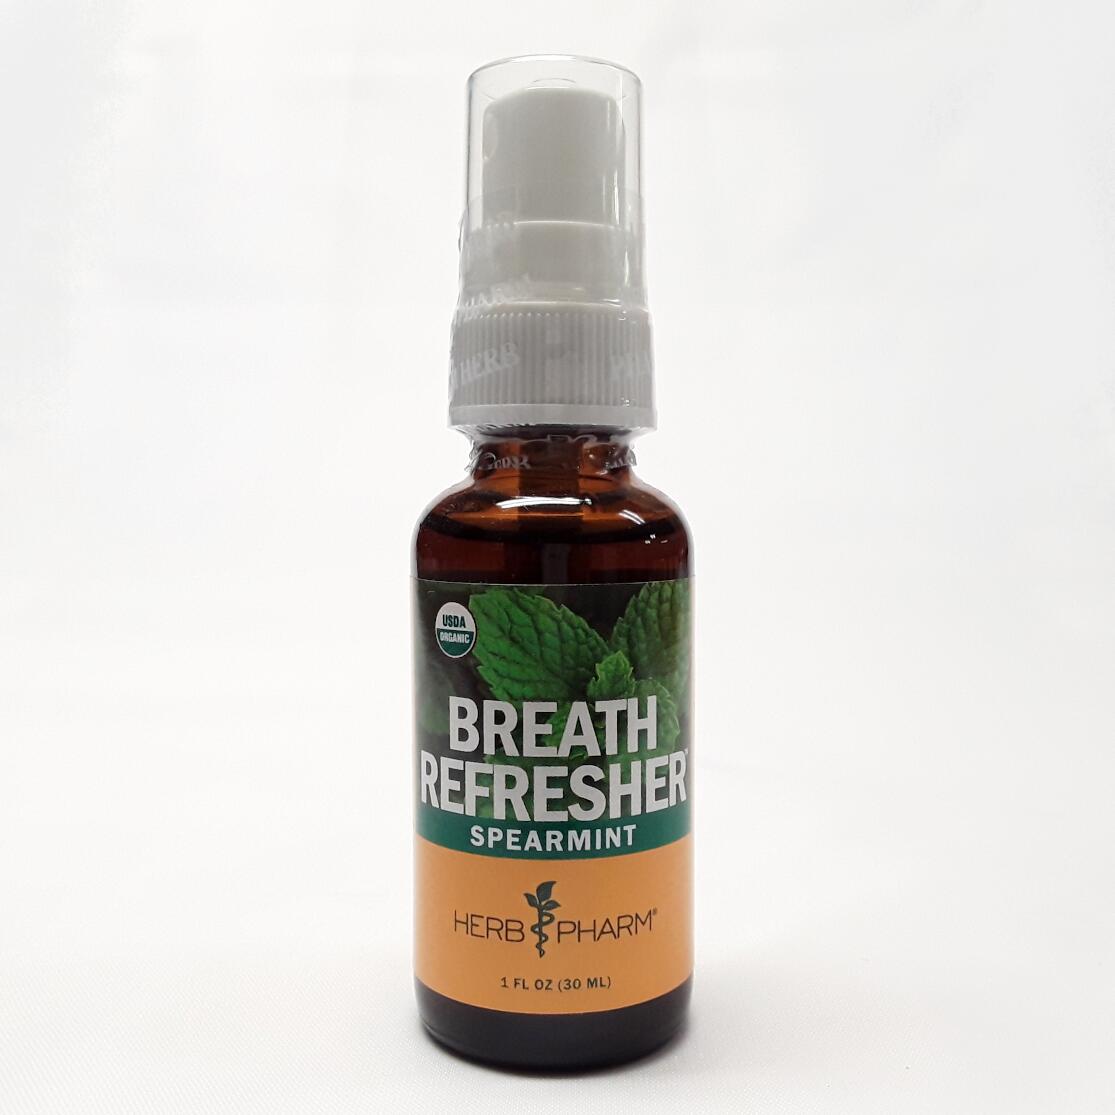 Herbpharm Breath Refresher Spearmint Product Image View